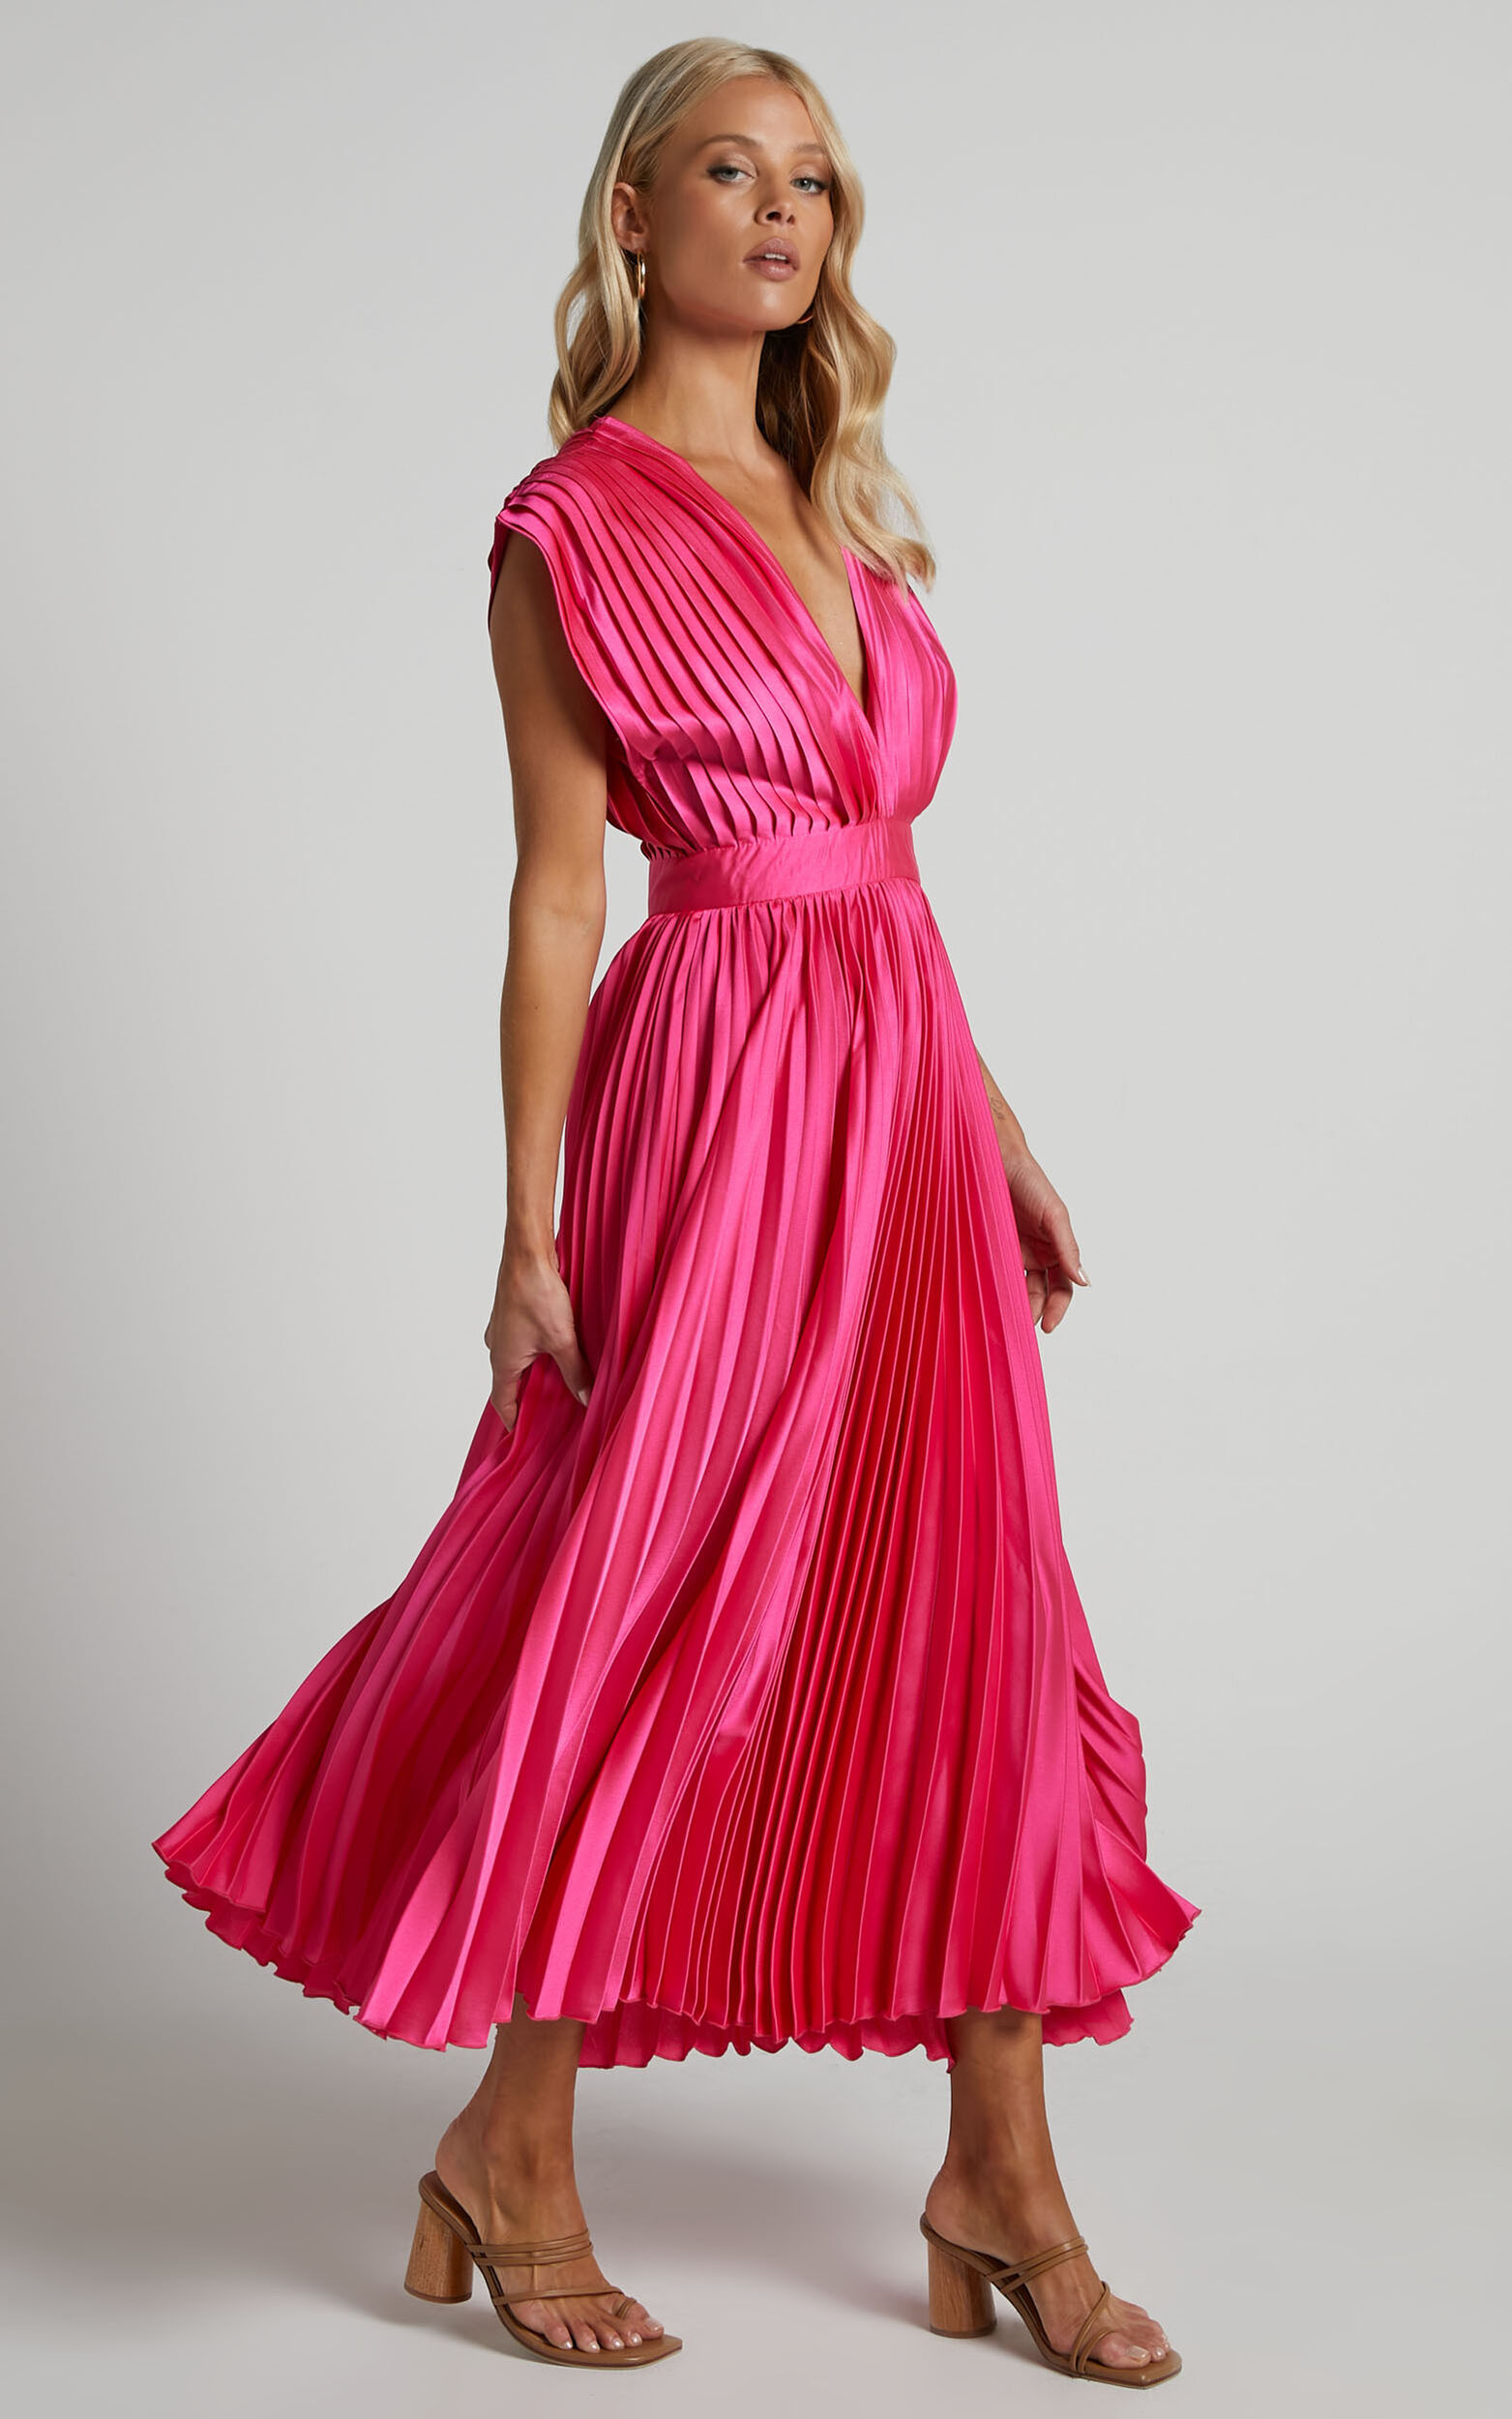 Pleated Dresses for Women - Sexy Pleated Dresses